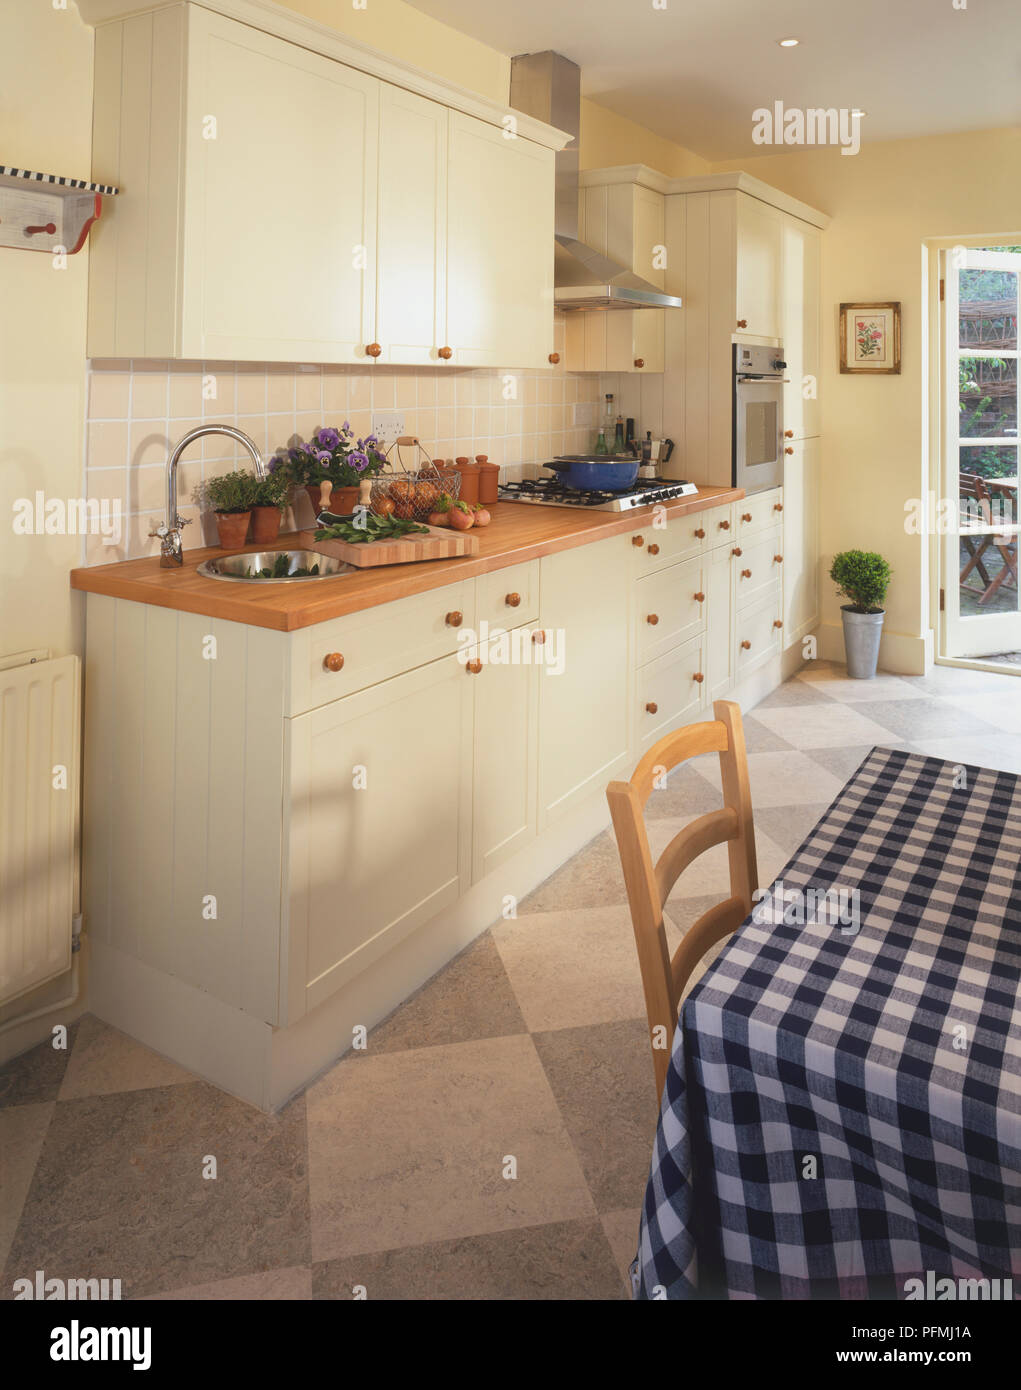 Standard fitted kitchen units in dining area. Stock Photo